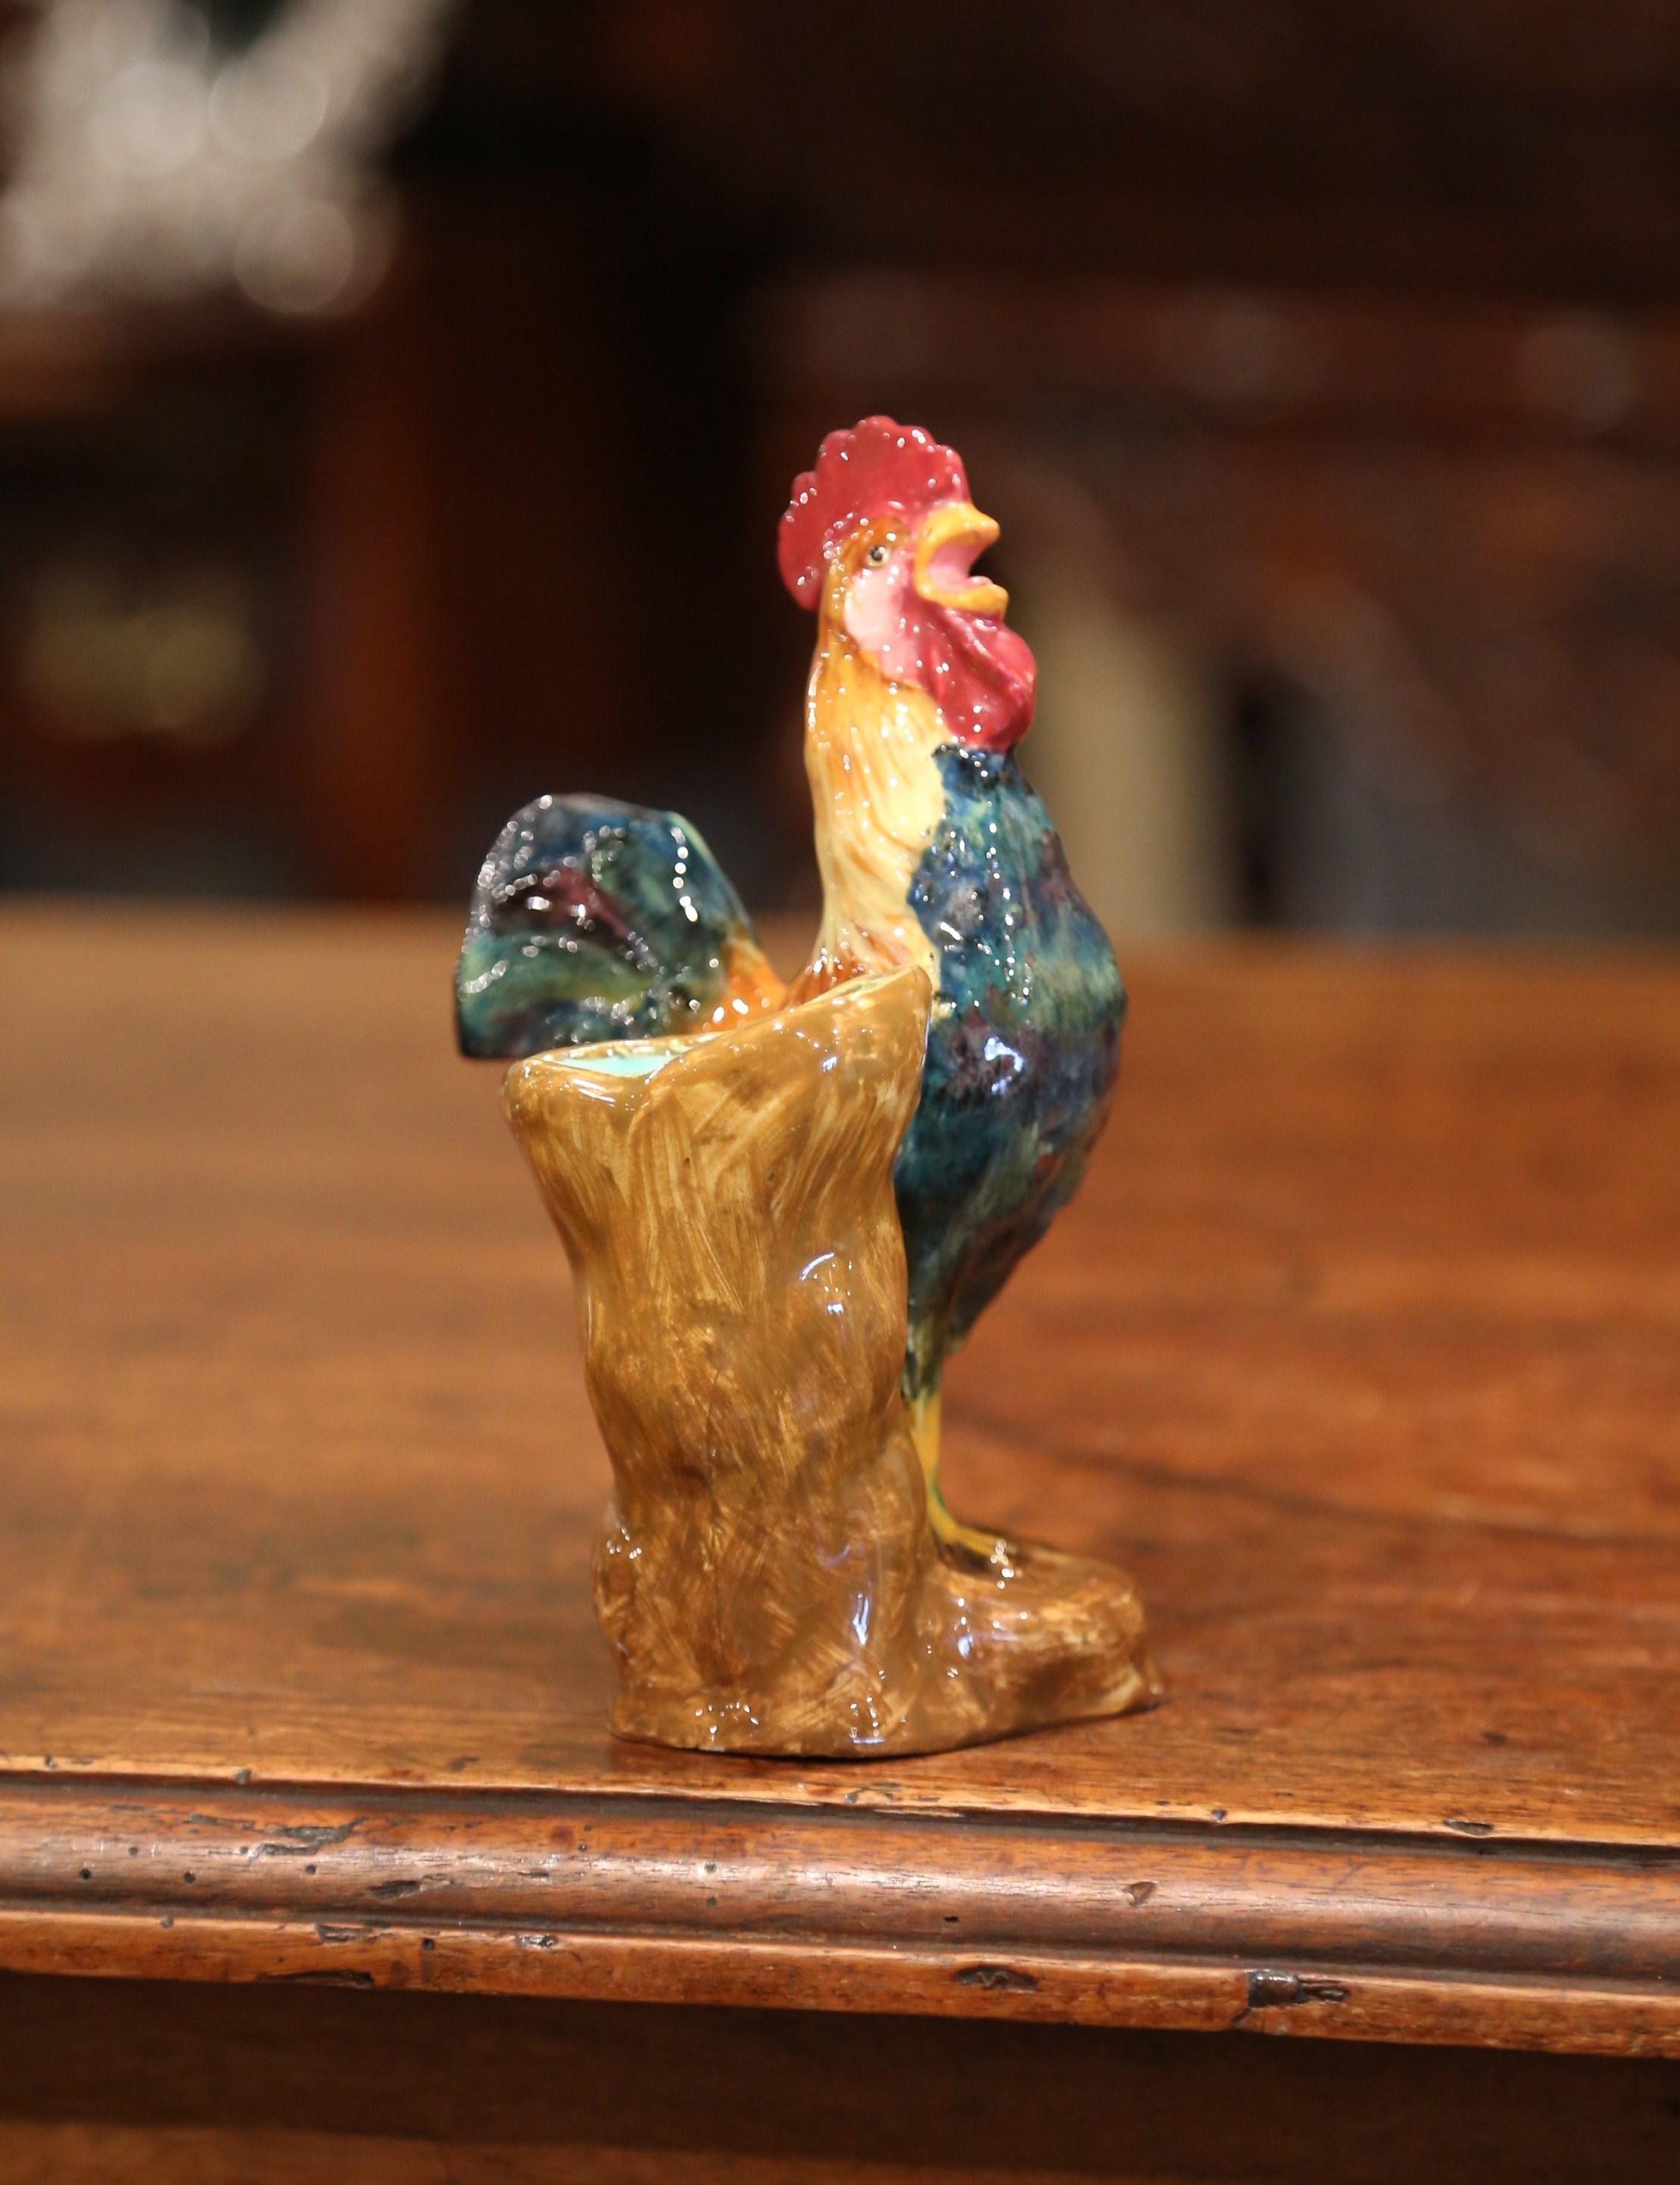 Bring the country French style into your home with this small, colorful, antique rooster figure. Crafted in France circa 1880, the chicken sculpture is a Classic French country home accessory. The porcelain animal is hand painted and signed on the